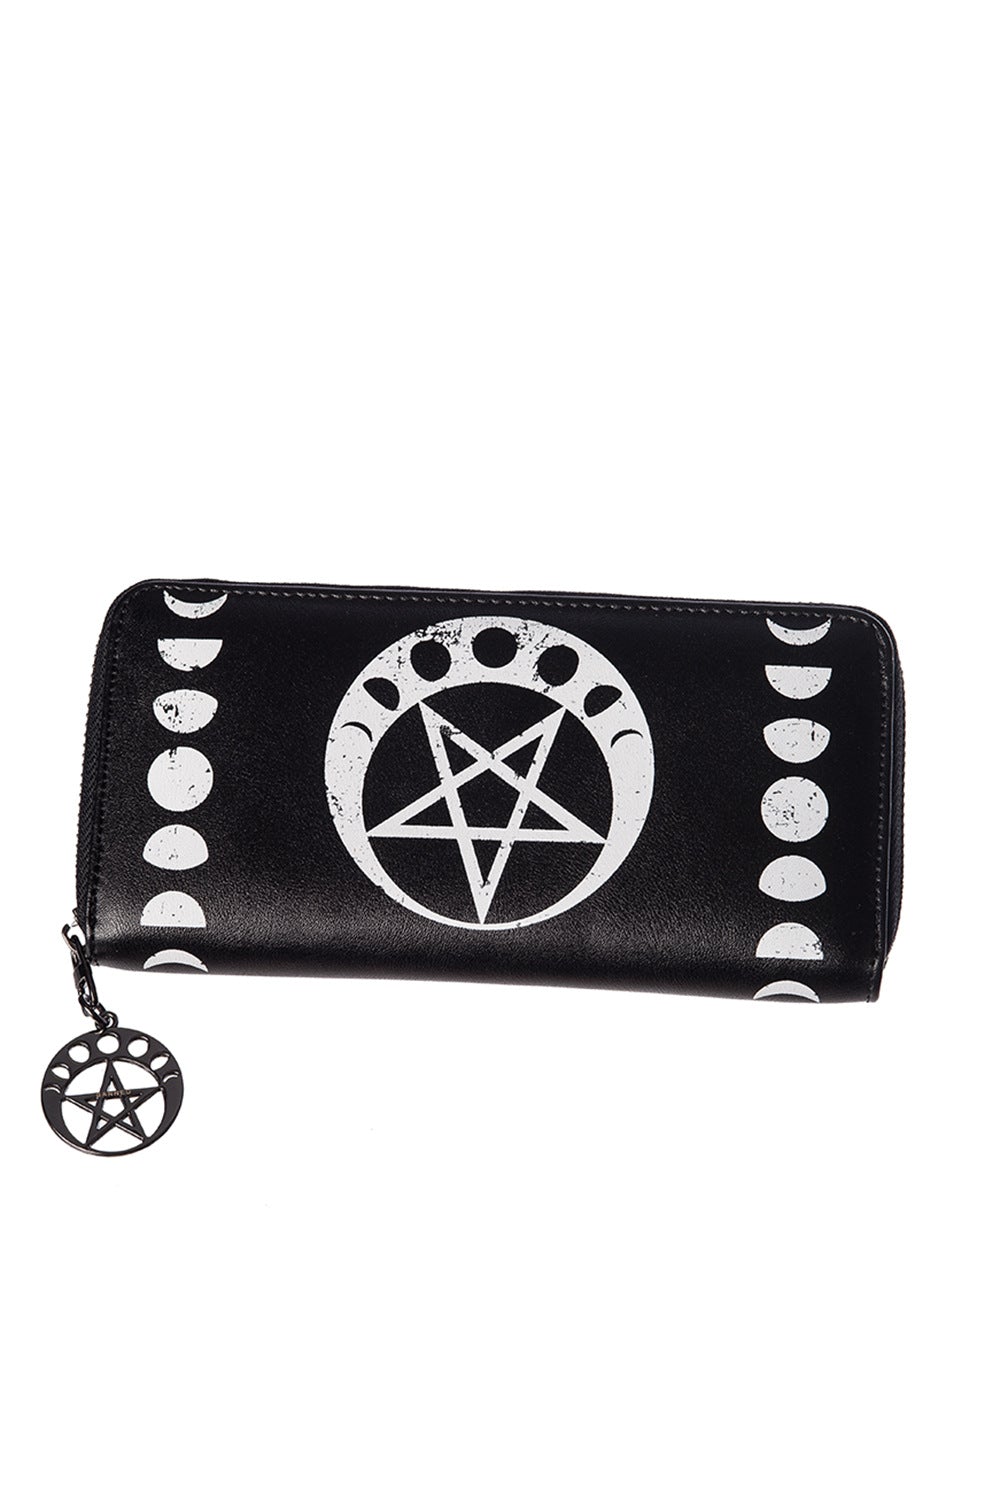 Banned Alternative Black Tanith Moon Phase Wallet